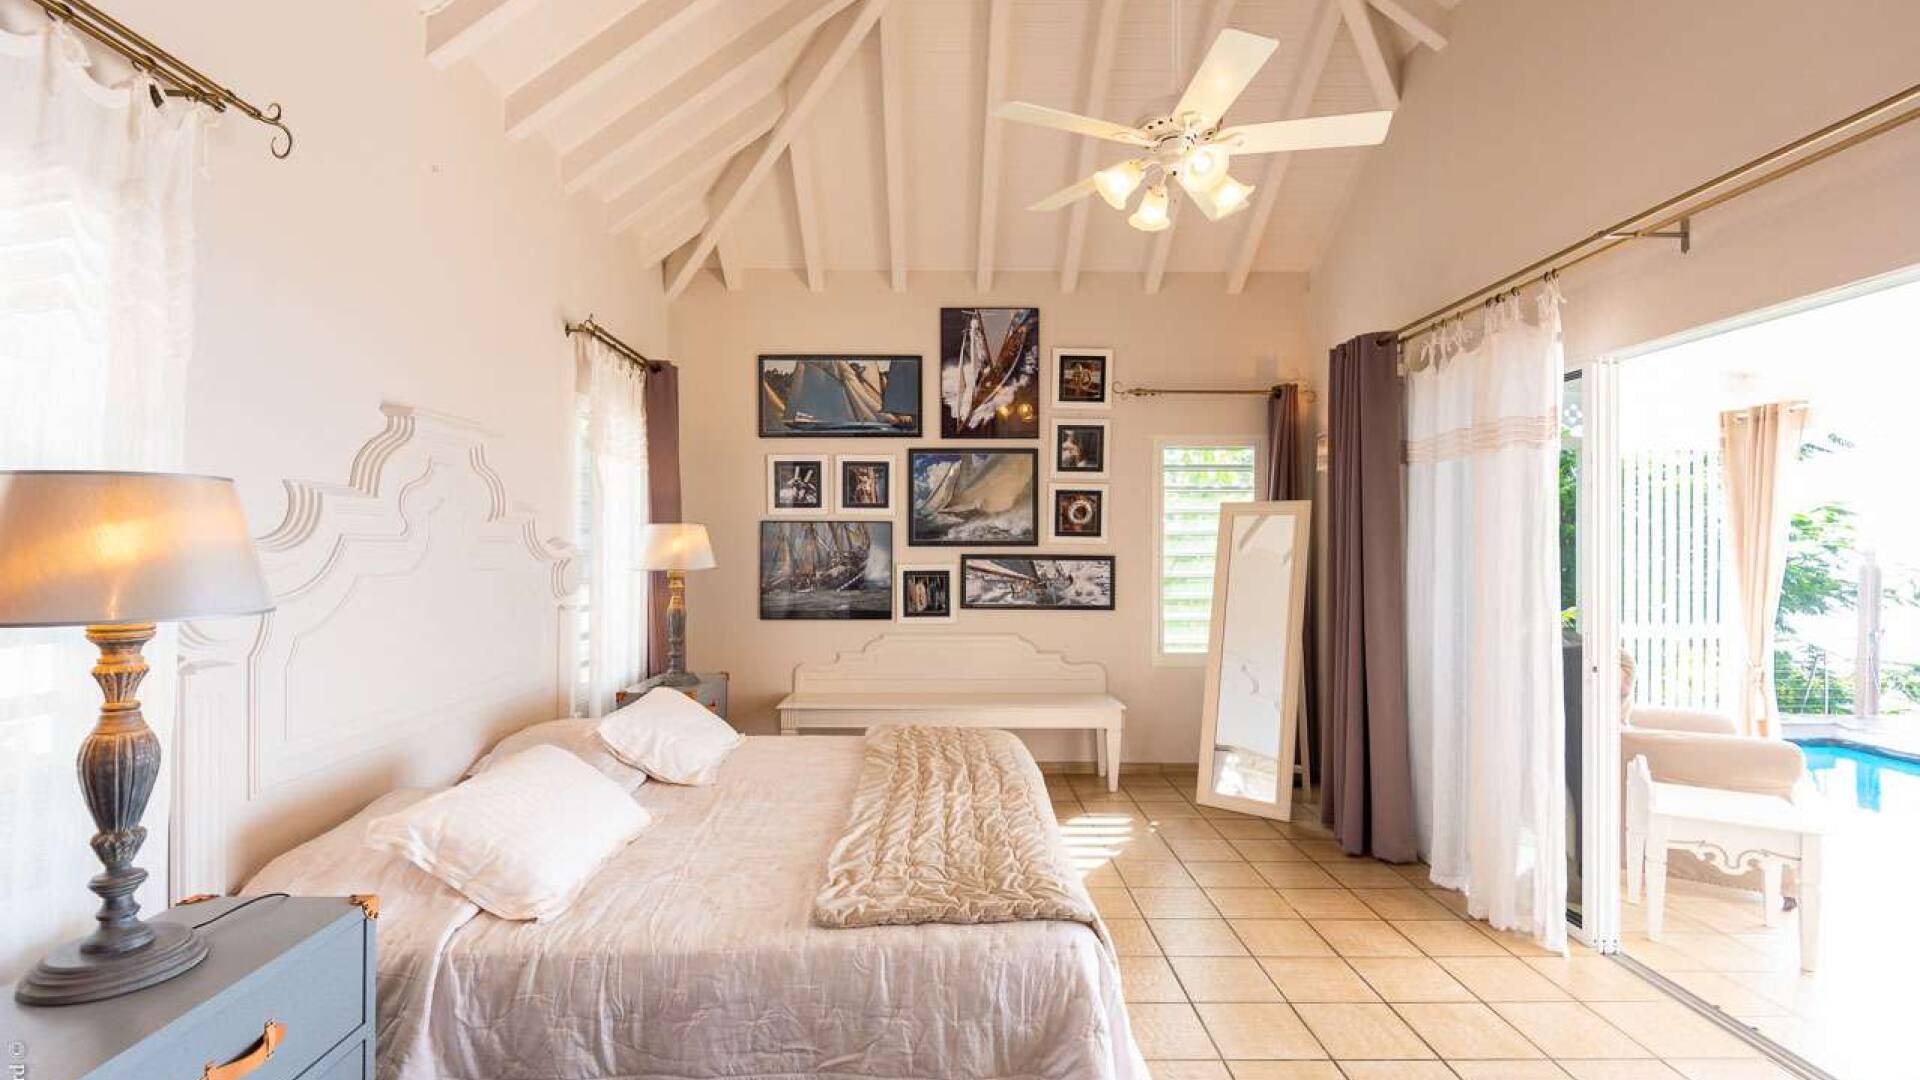 Bedroom at WV MOU, Lurin, St. Barthelemy